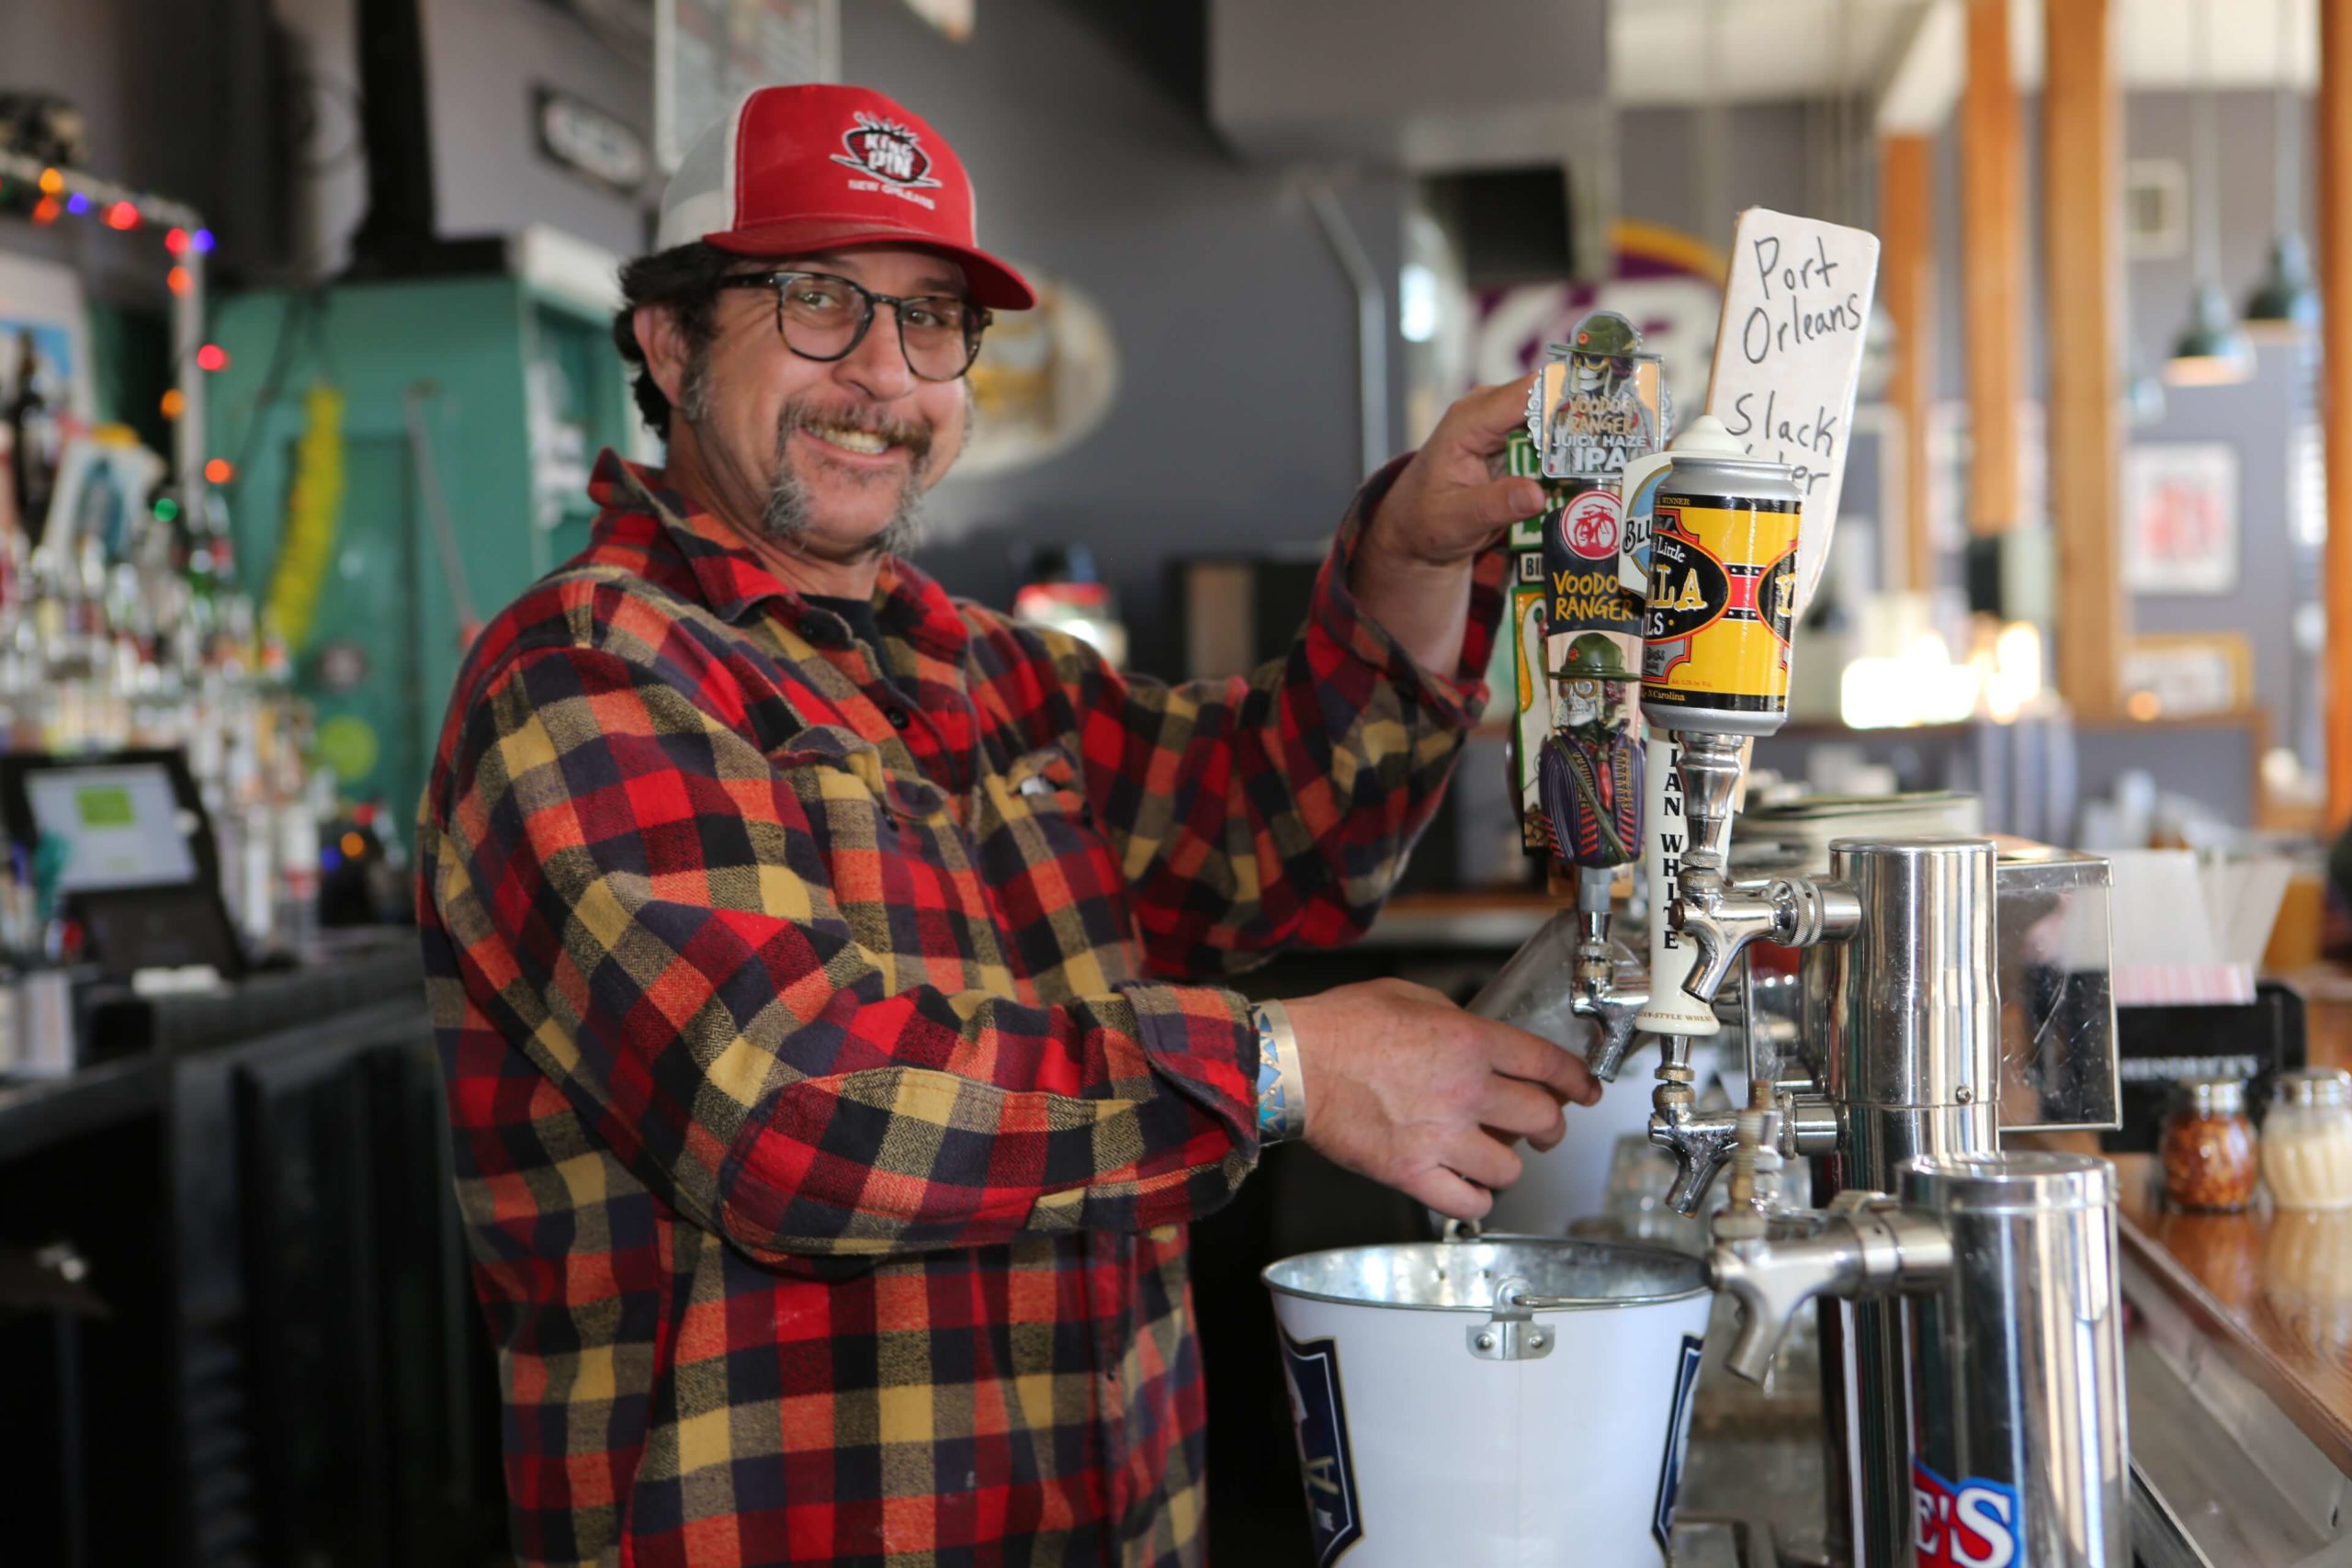 The Midway on Freret Street owner, Steve Watson pours a beer as a part of the People of Freret project in New Orleans on Tuesday, December 4, 2018.  (Photo by Peter G. Forest)